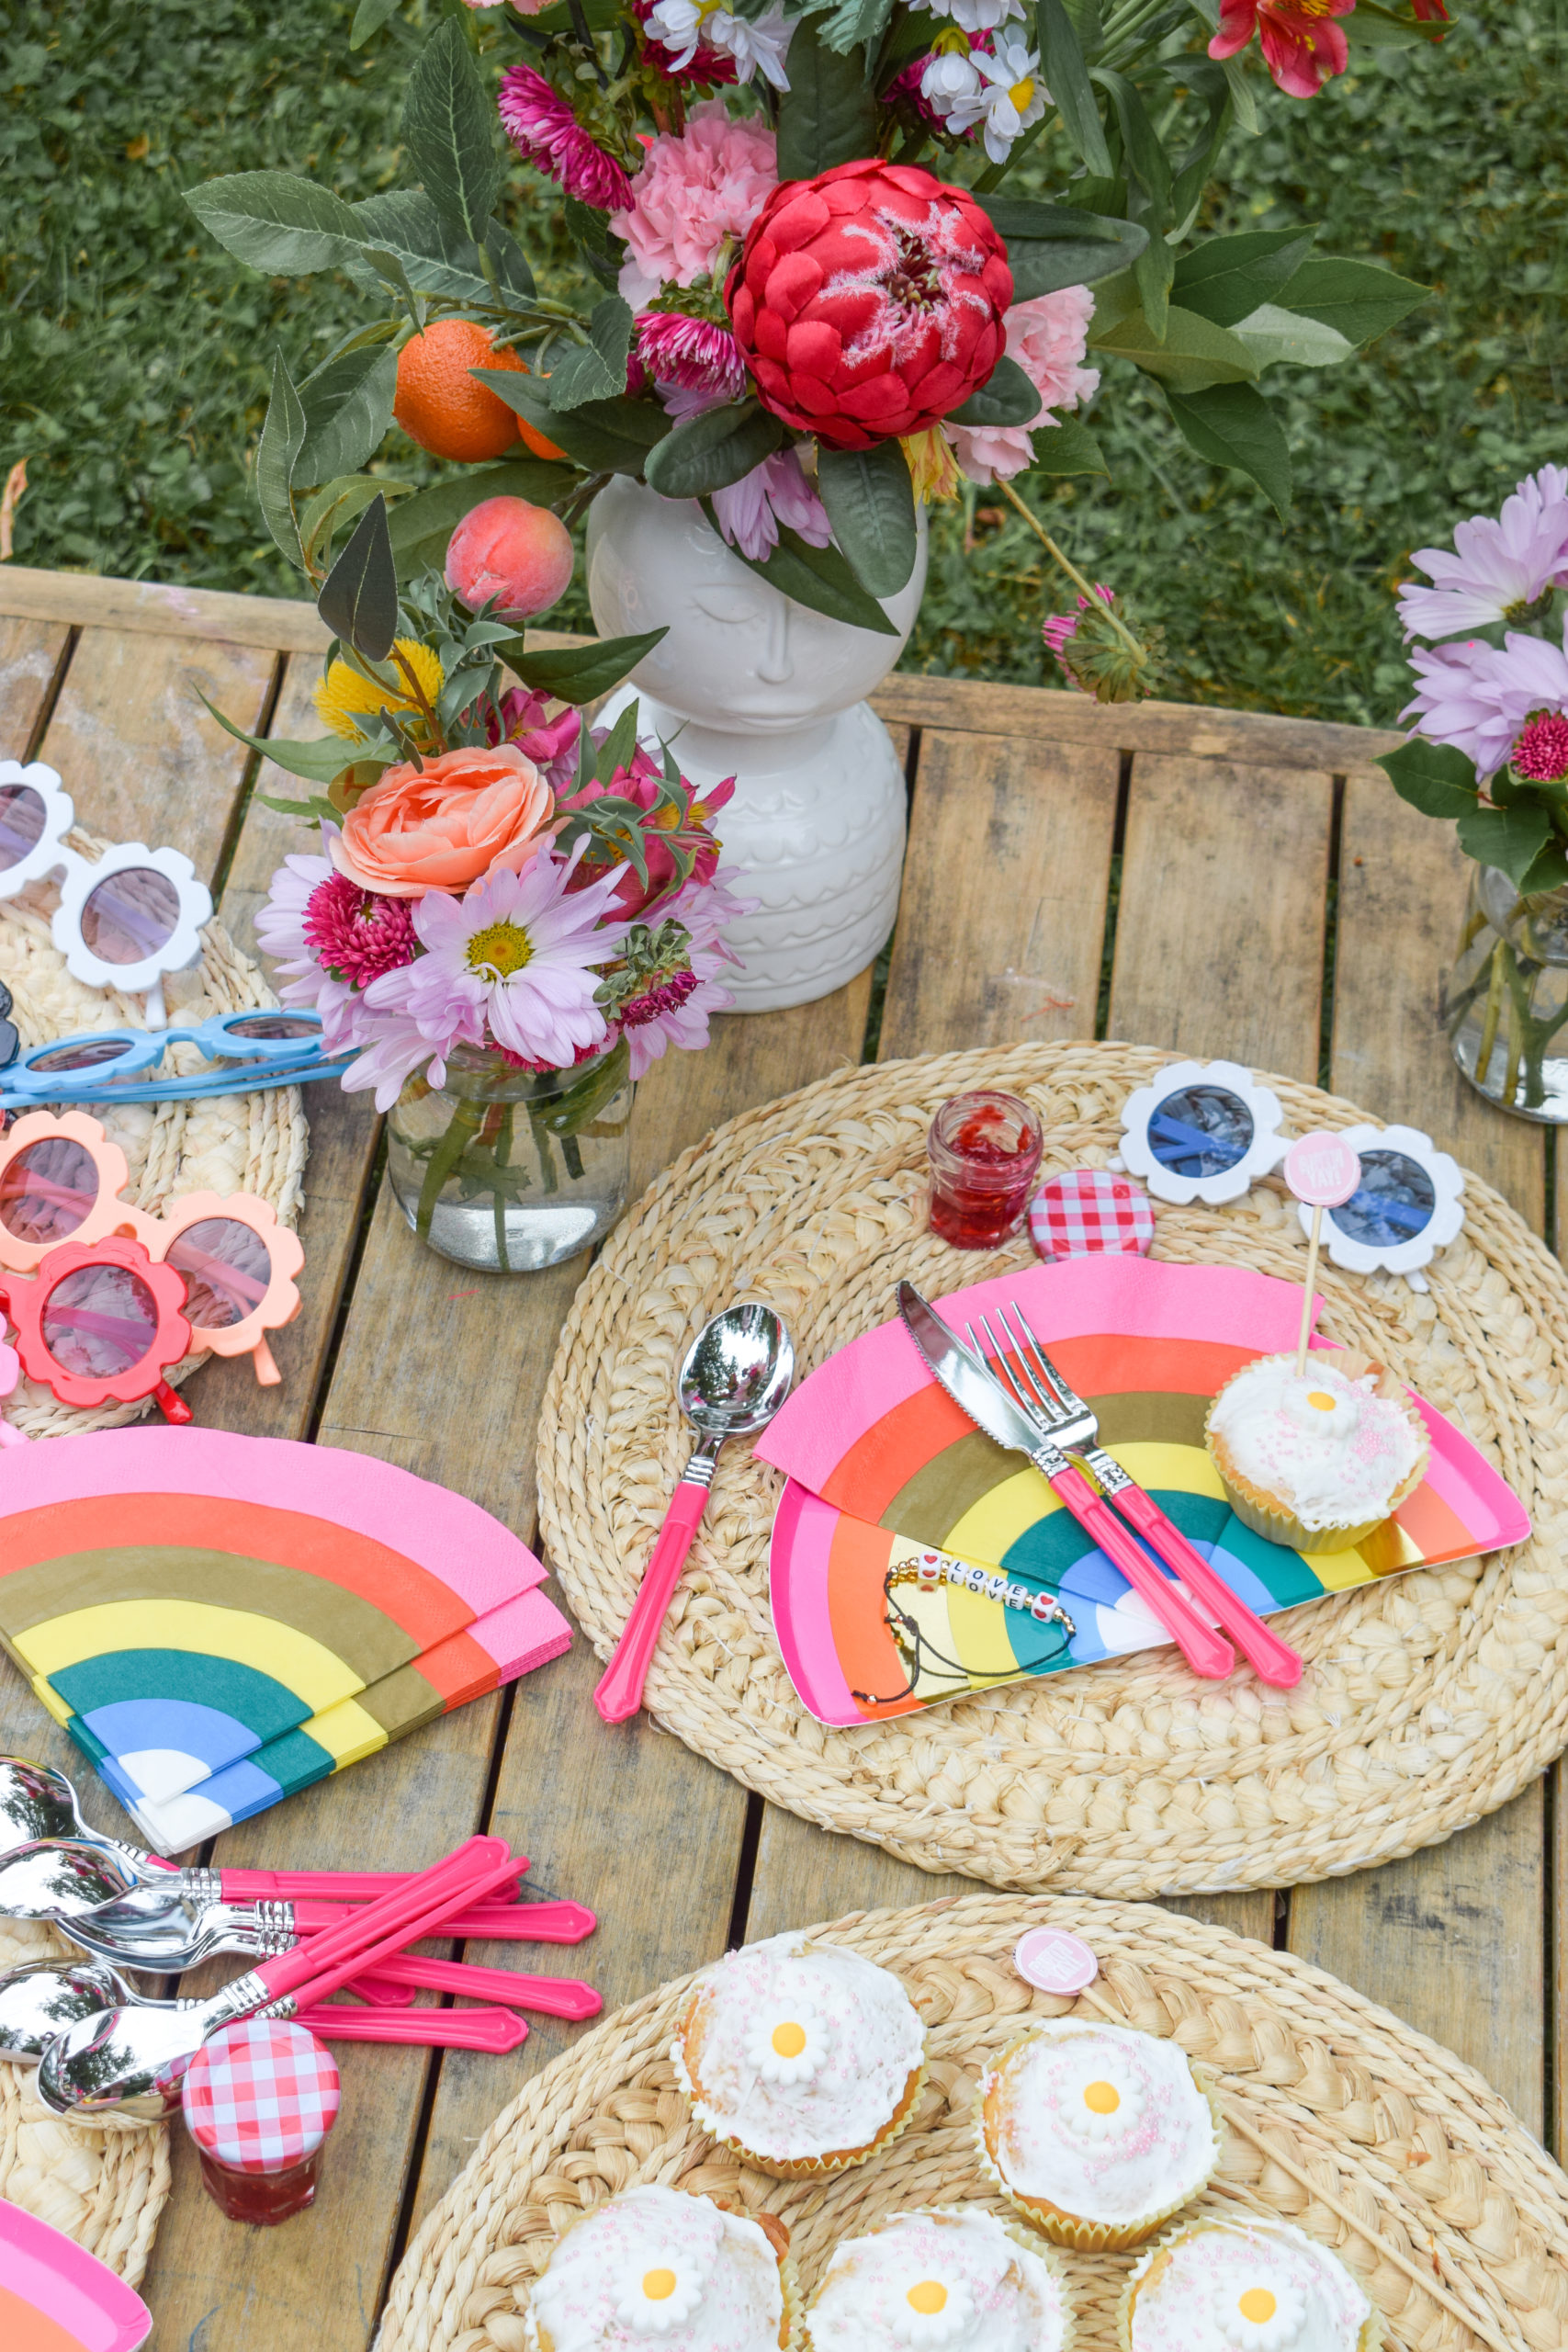 It's time for some groovy diy birthday party decor! Using good old fashioned DIYs and a few new kits from FISKARS, I created a groovy party.